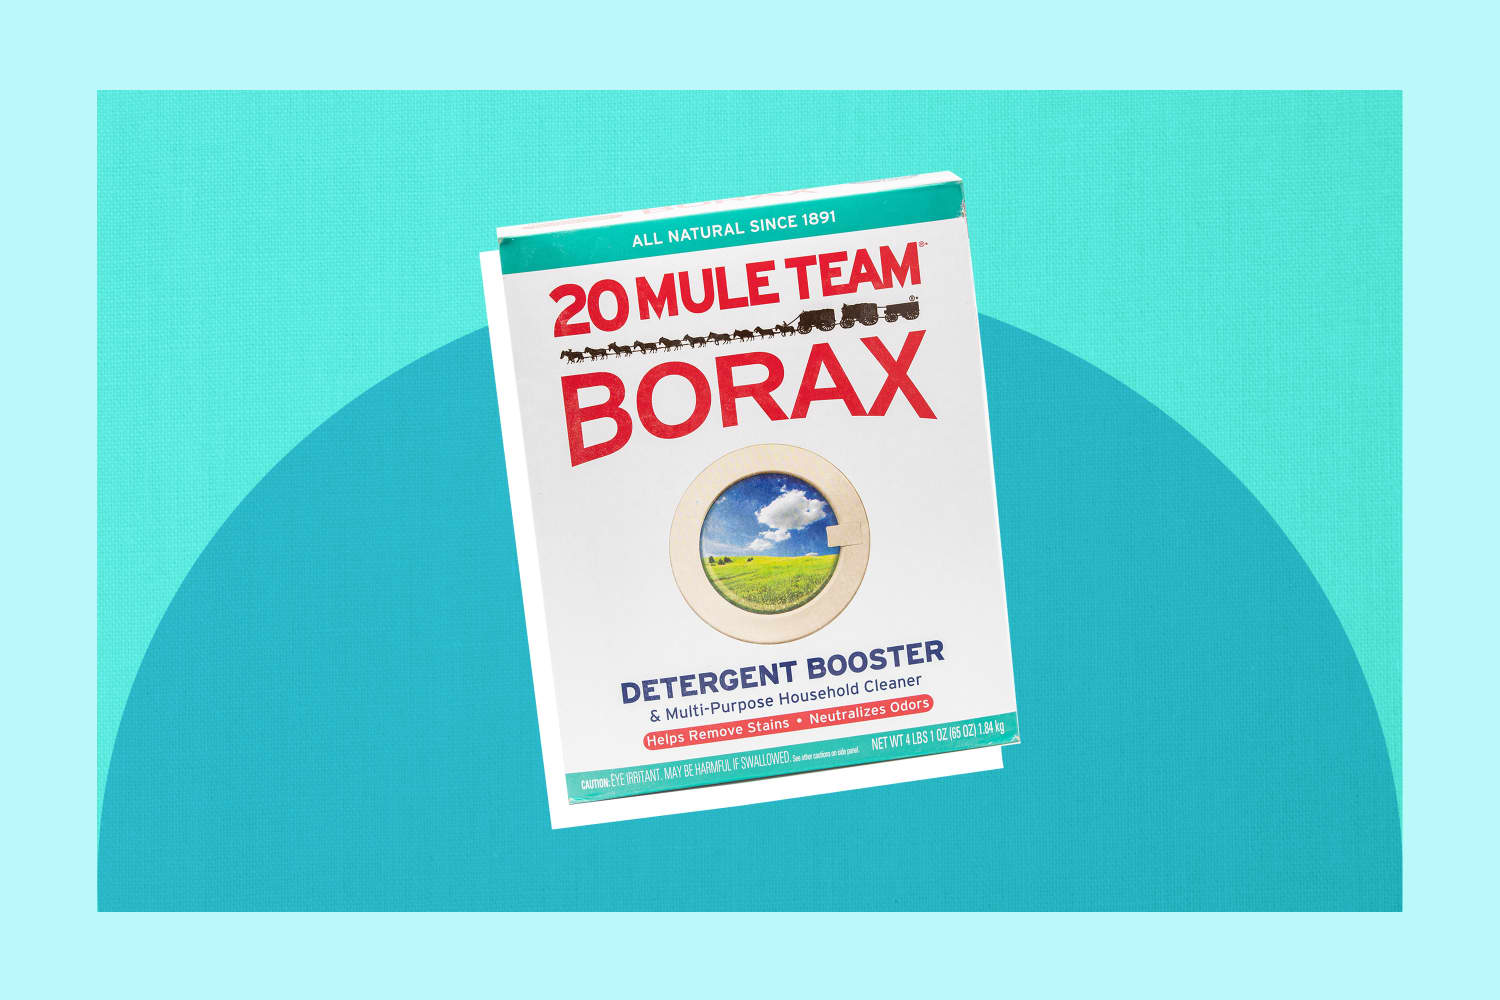 16 Borax Uses for Every Part of Your Home